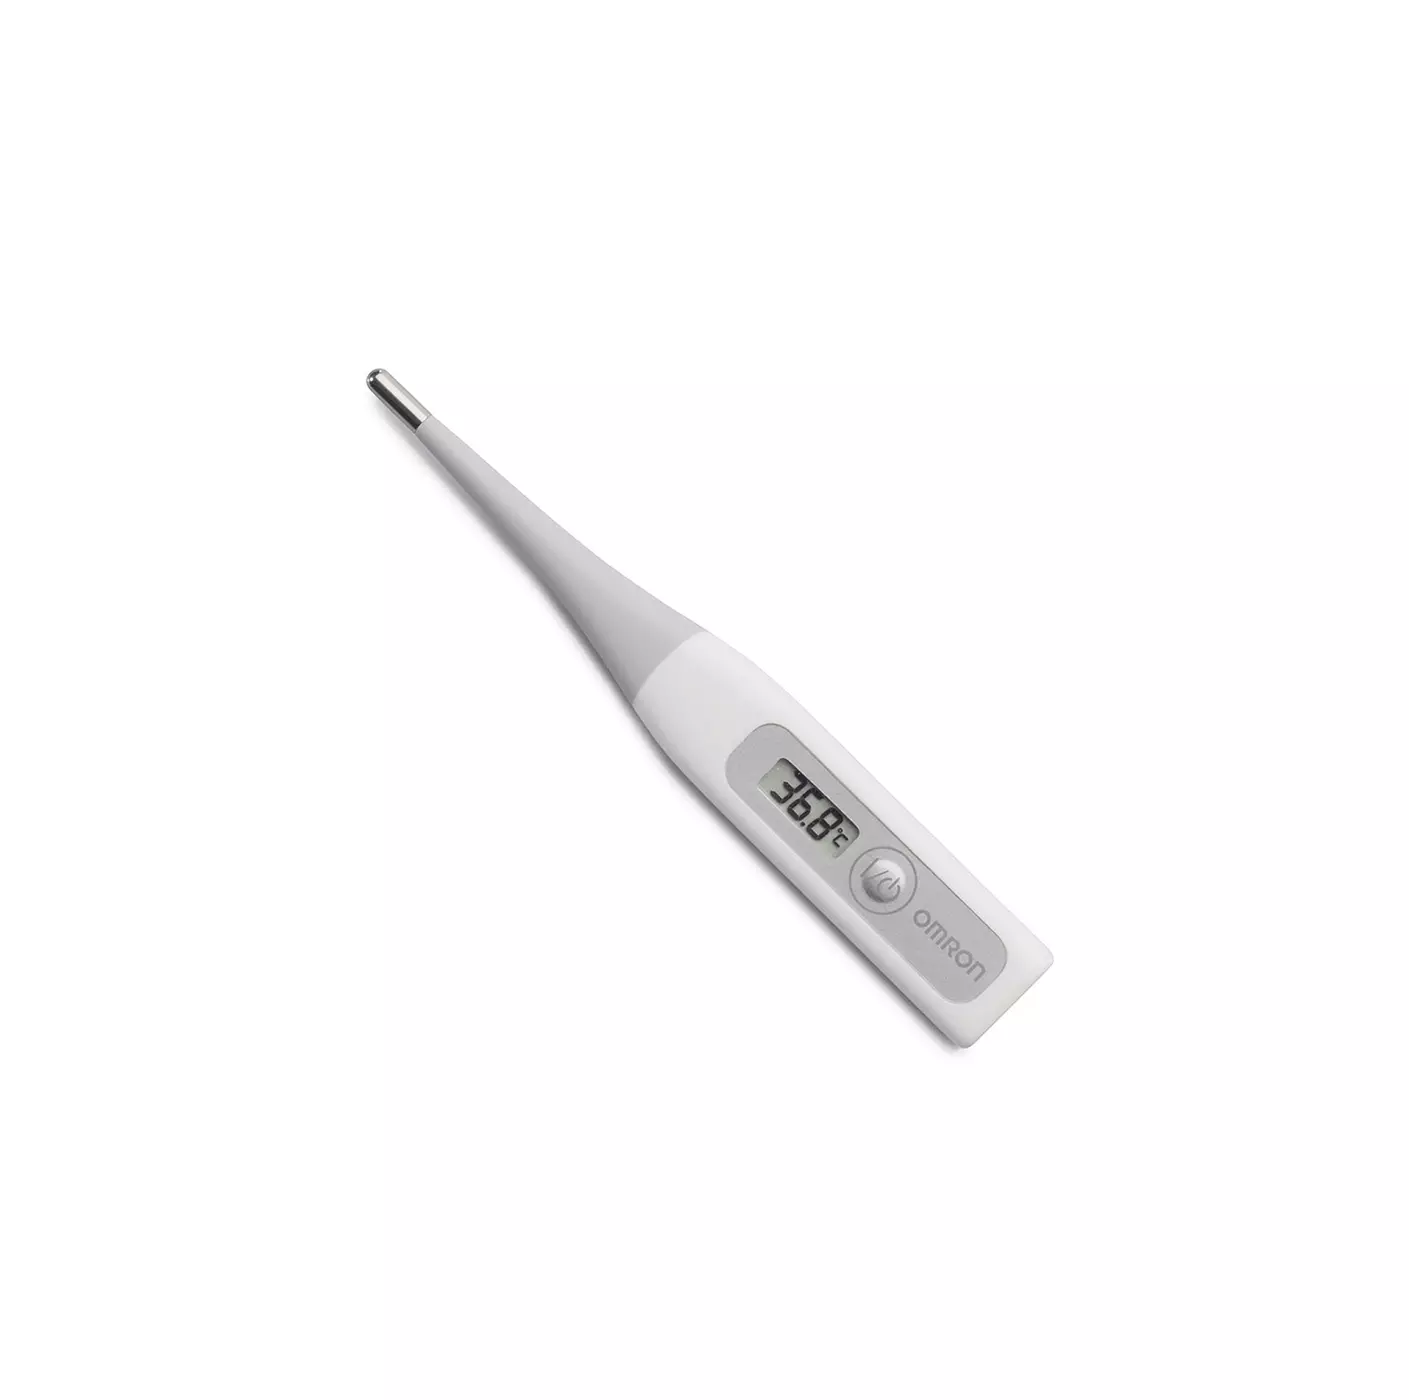 Omron Flextemp Smart Thermometer With Flexible